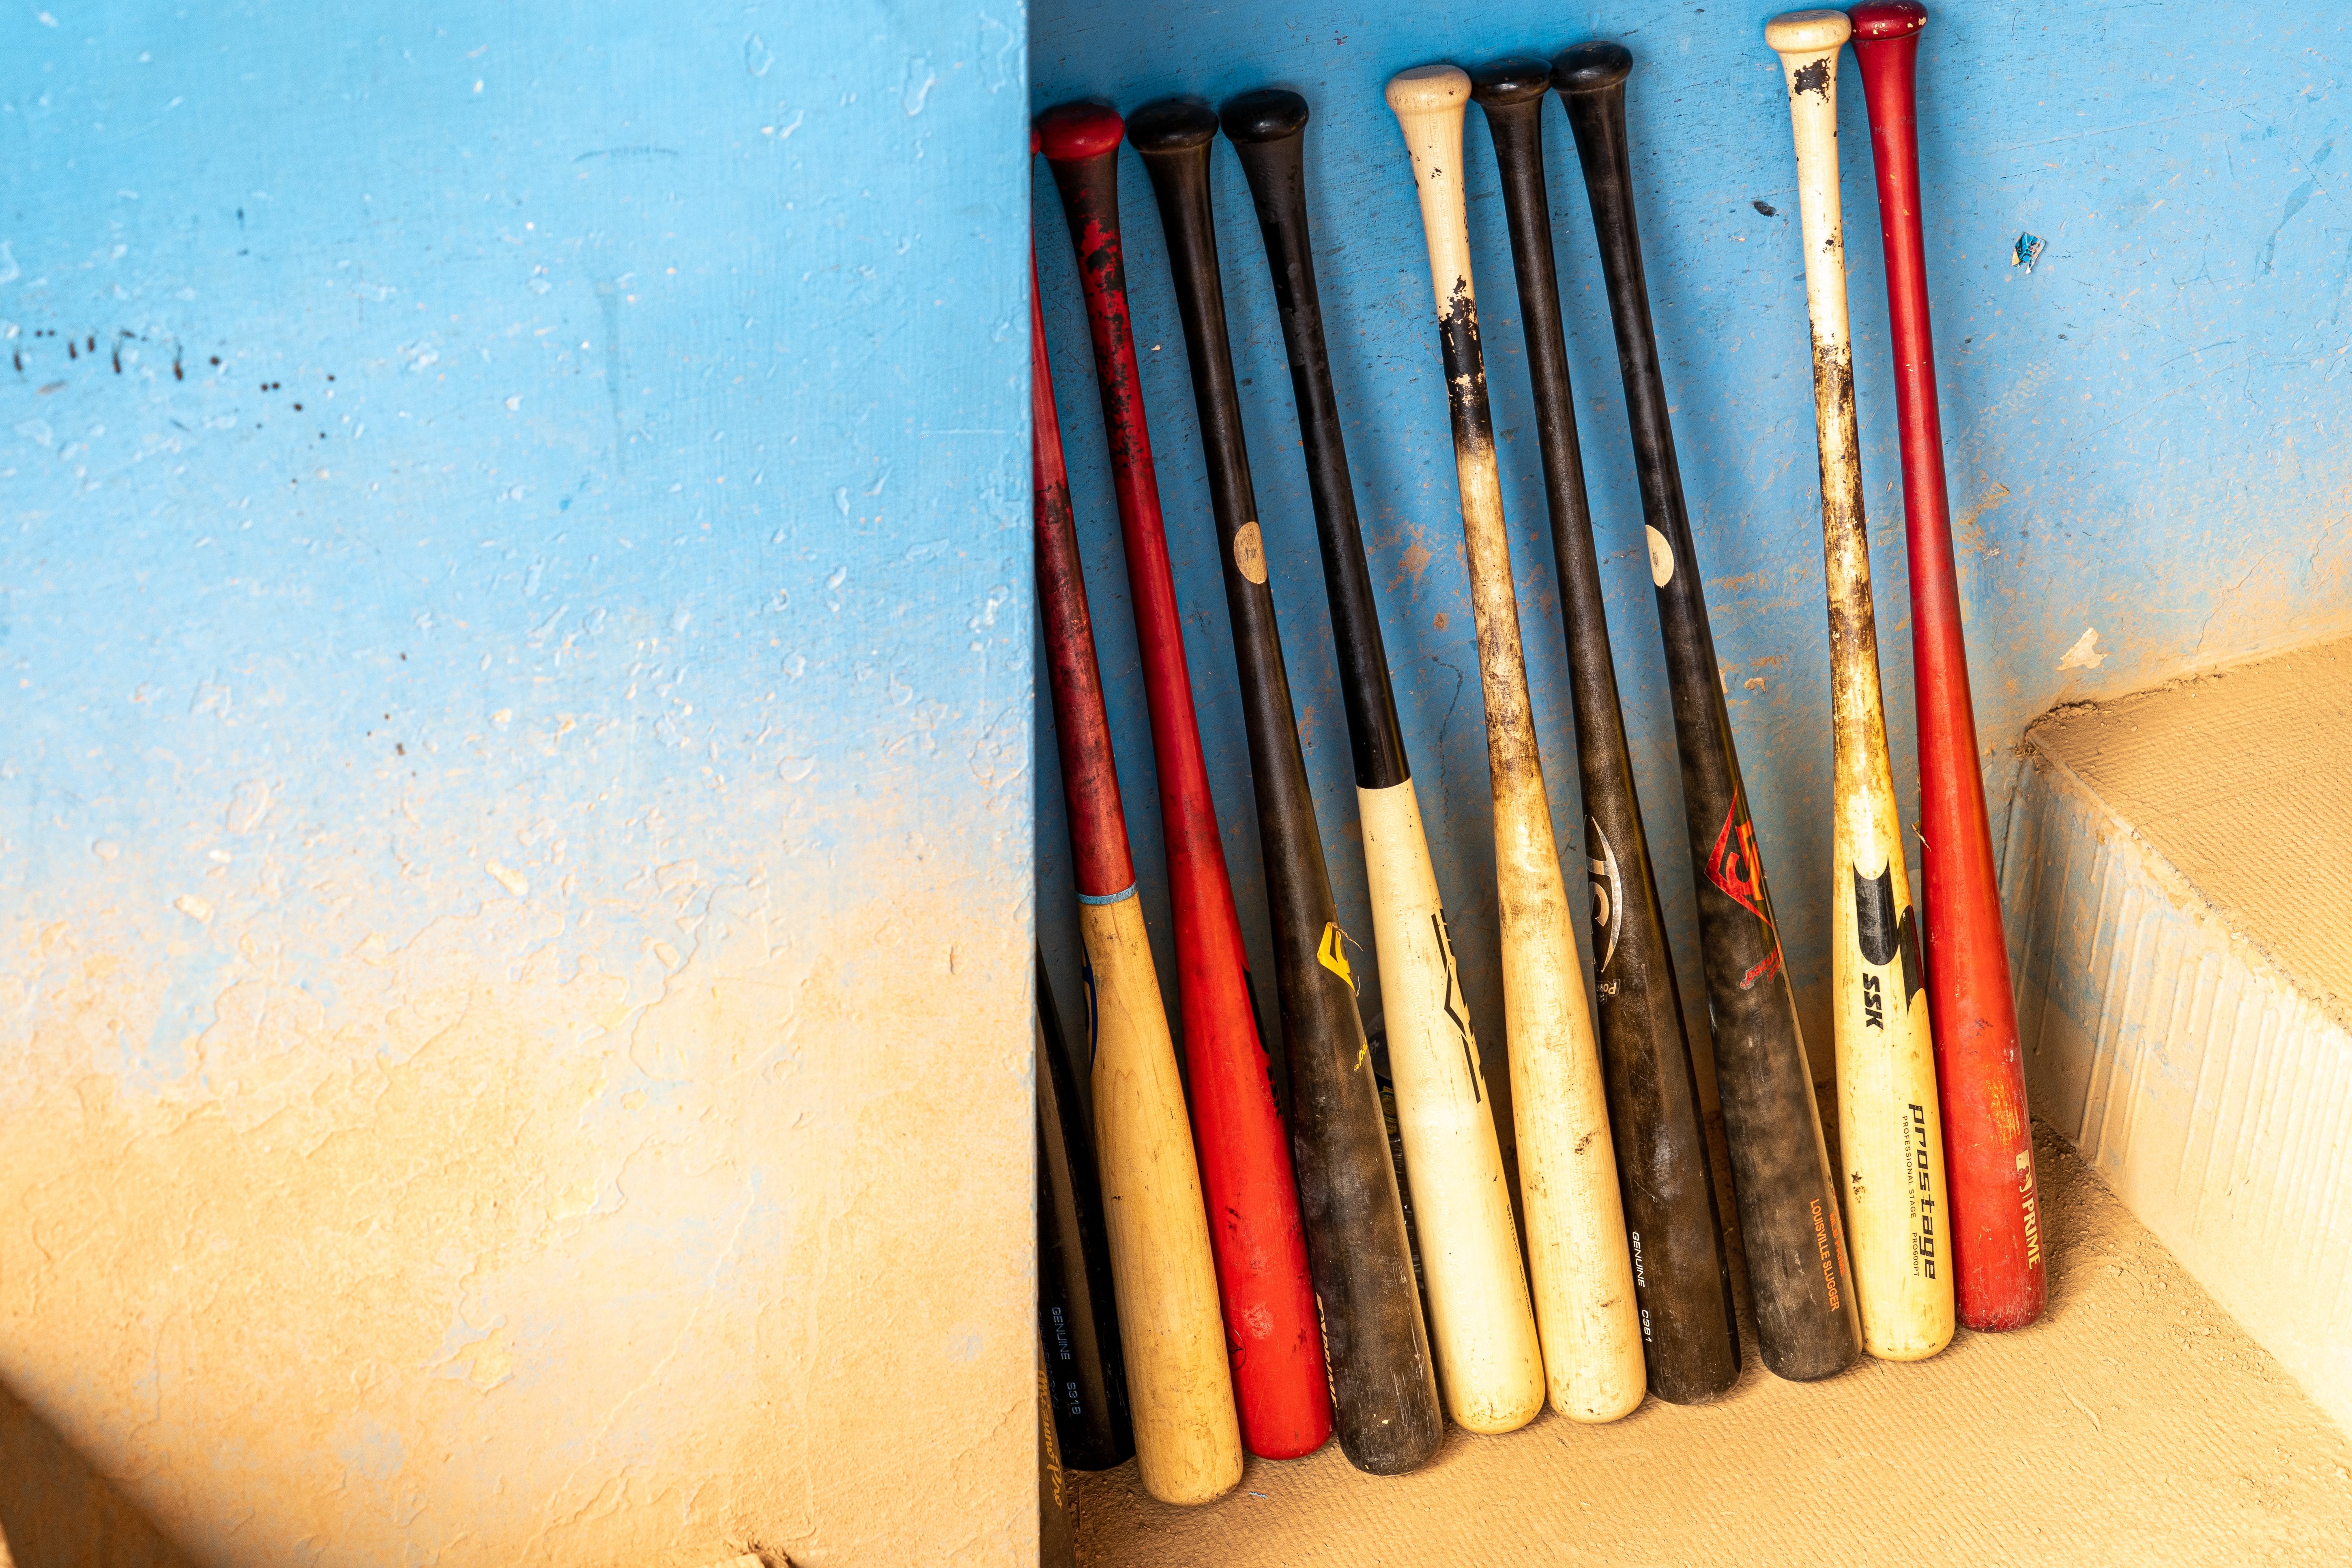 A large group of wooden bats leaning against a dugout wall.